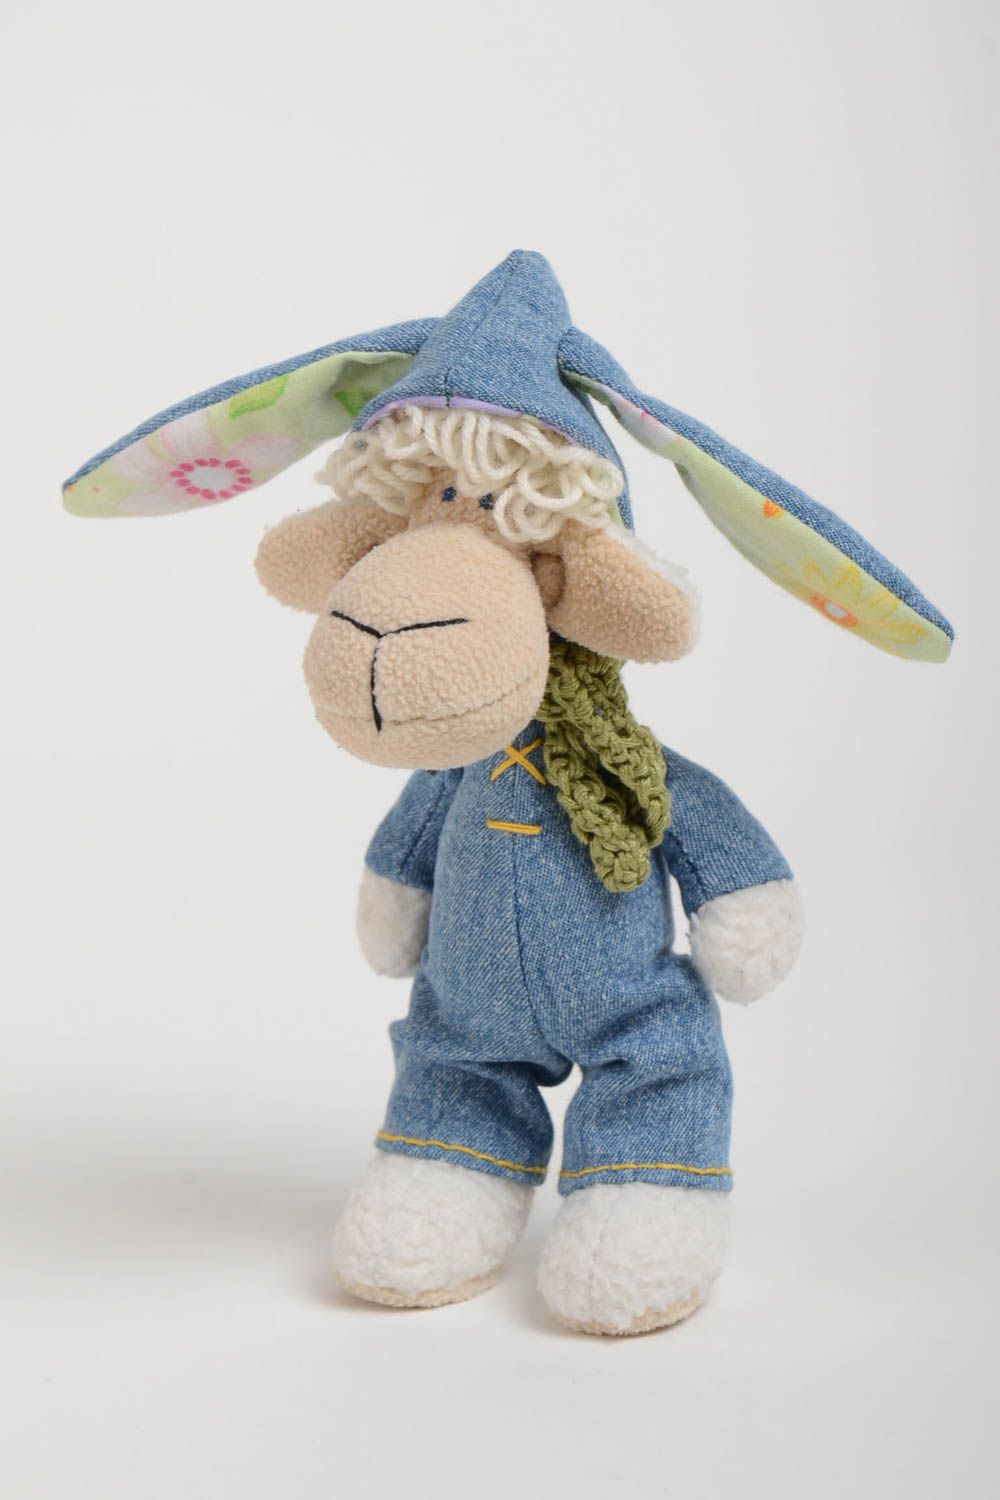 Small handmade soft toy made of felt and jeans unusual for kids photo 2